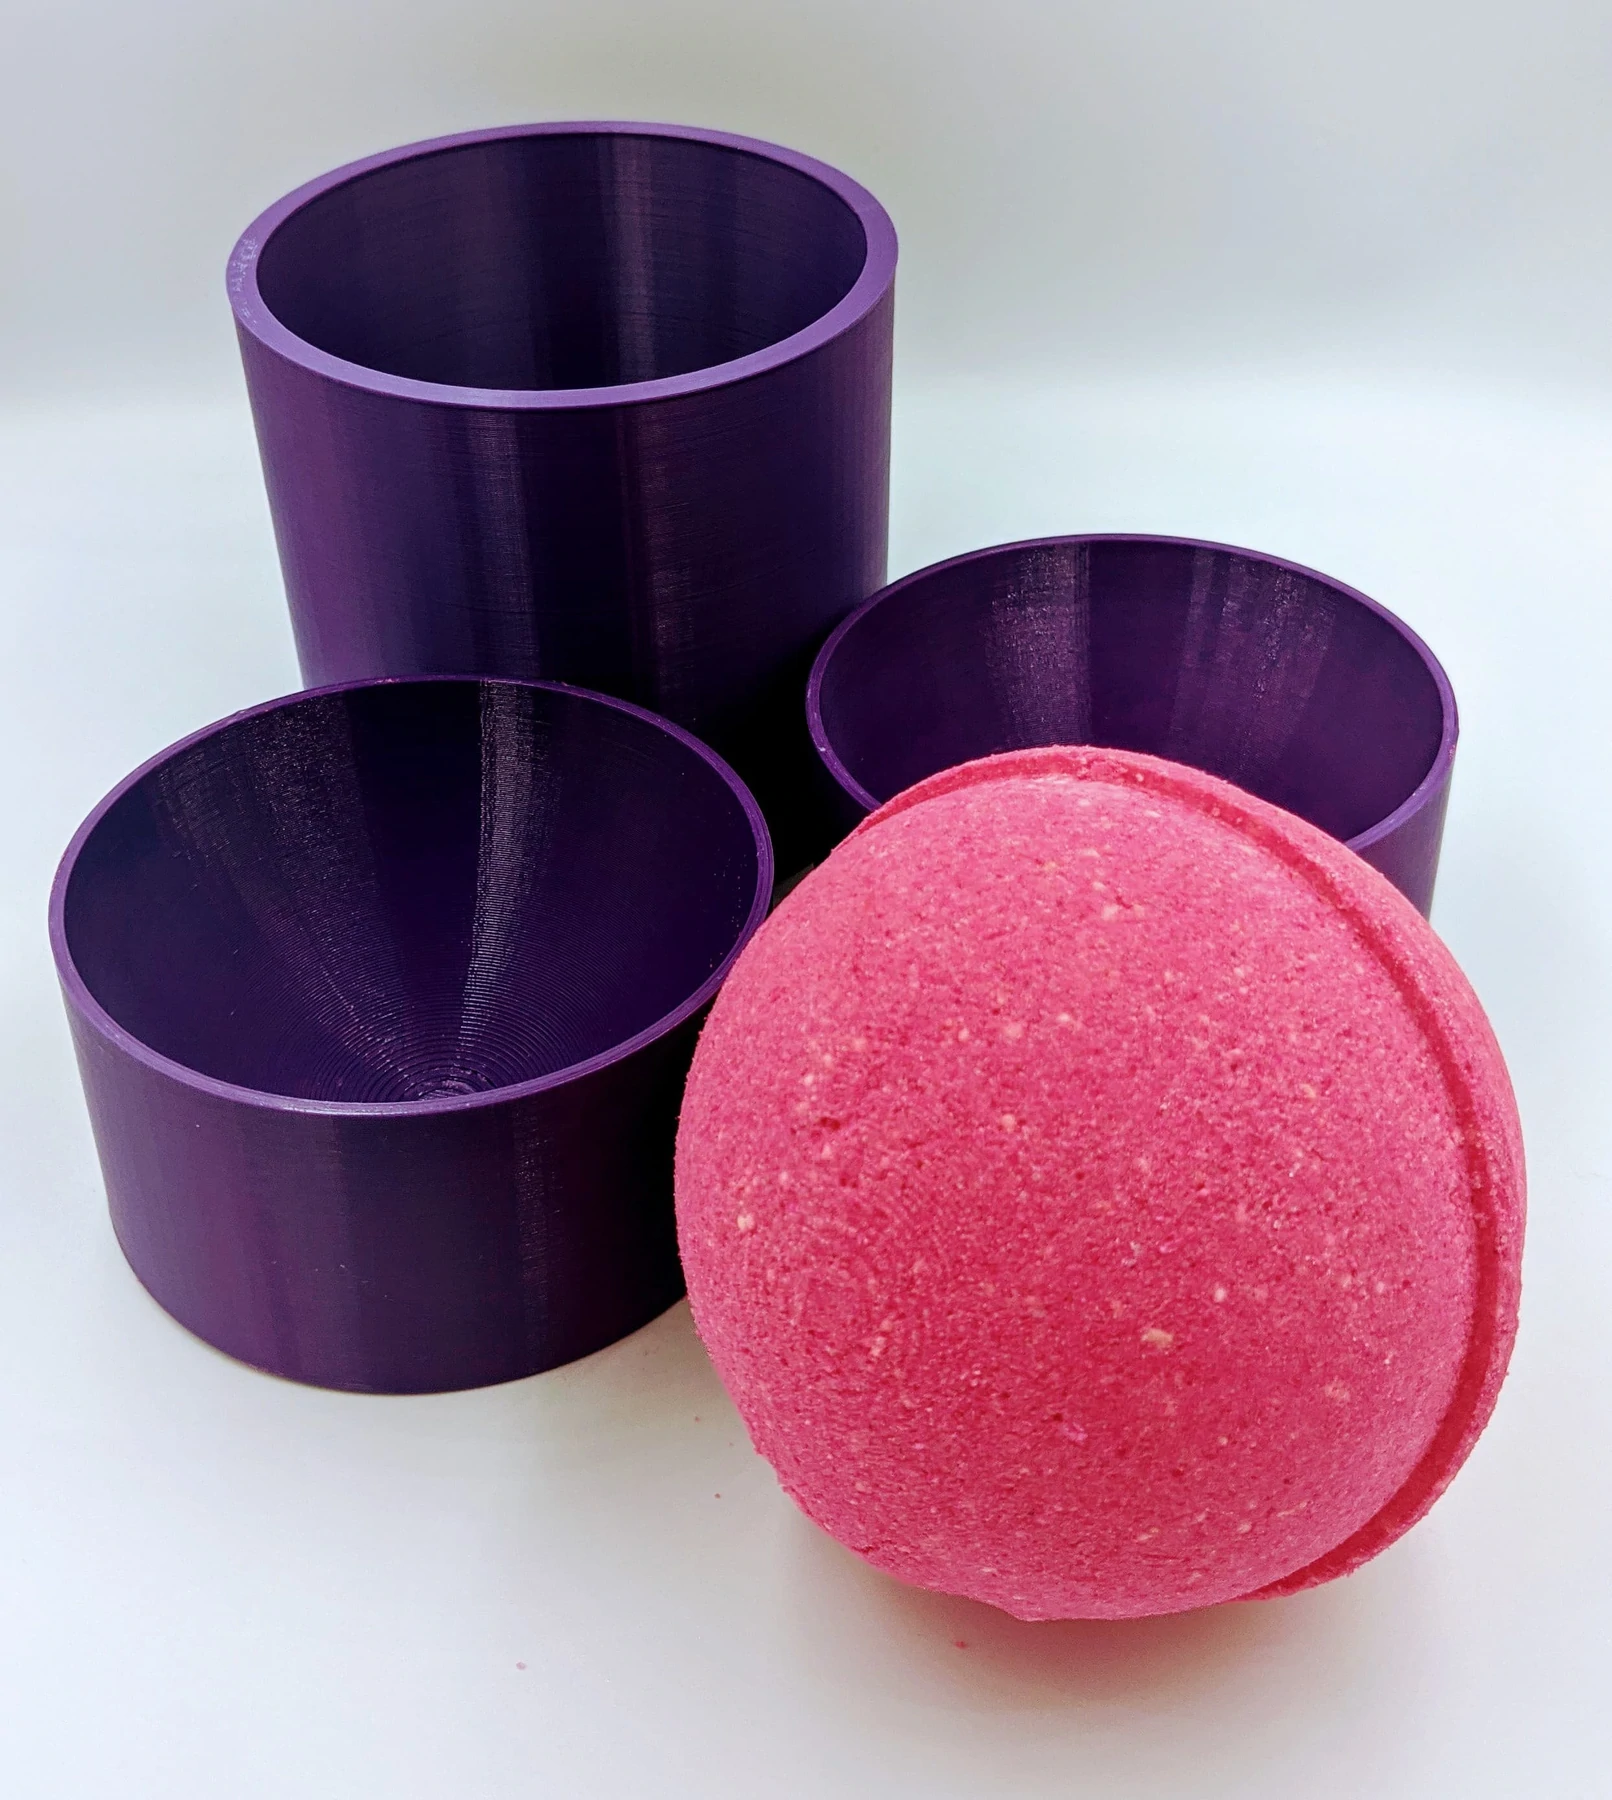 Round Indent Bath Bomb Mold in 3 Sizes 